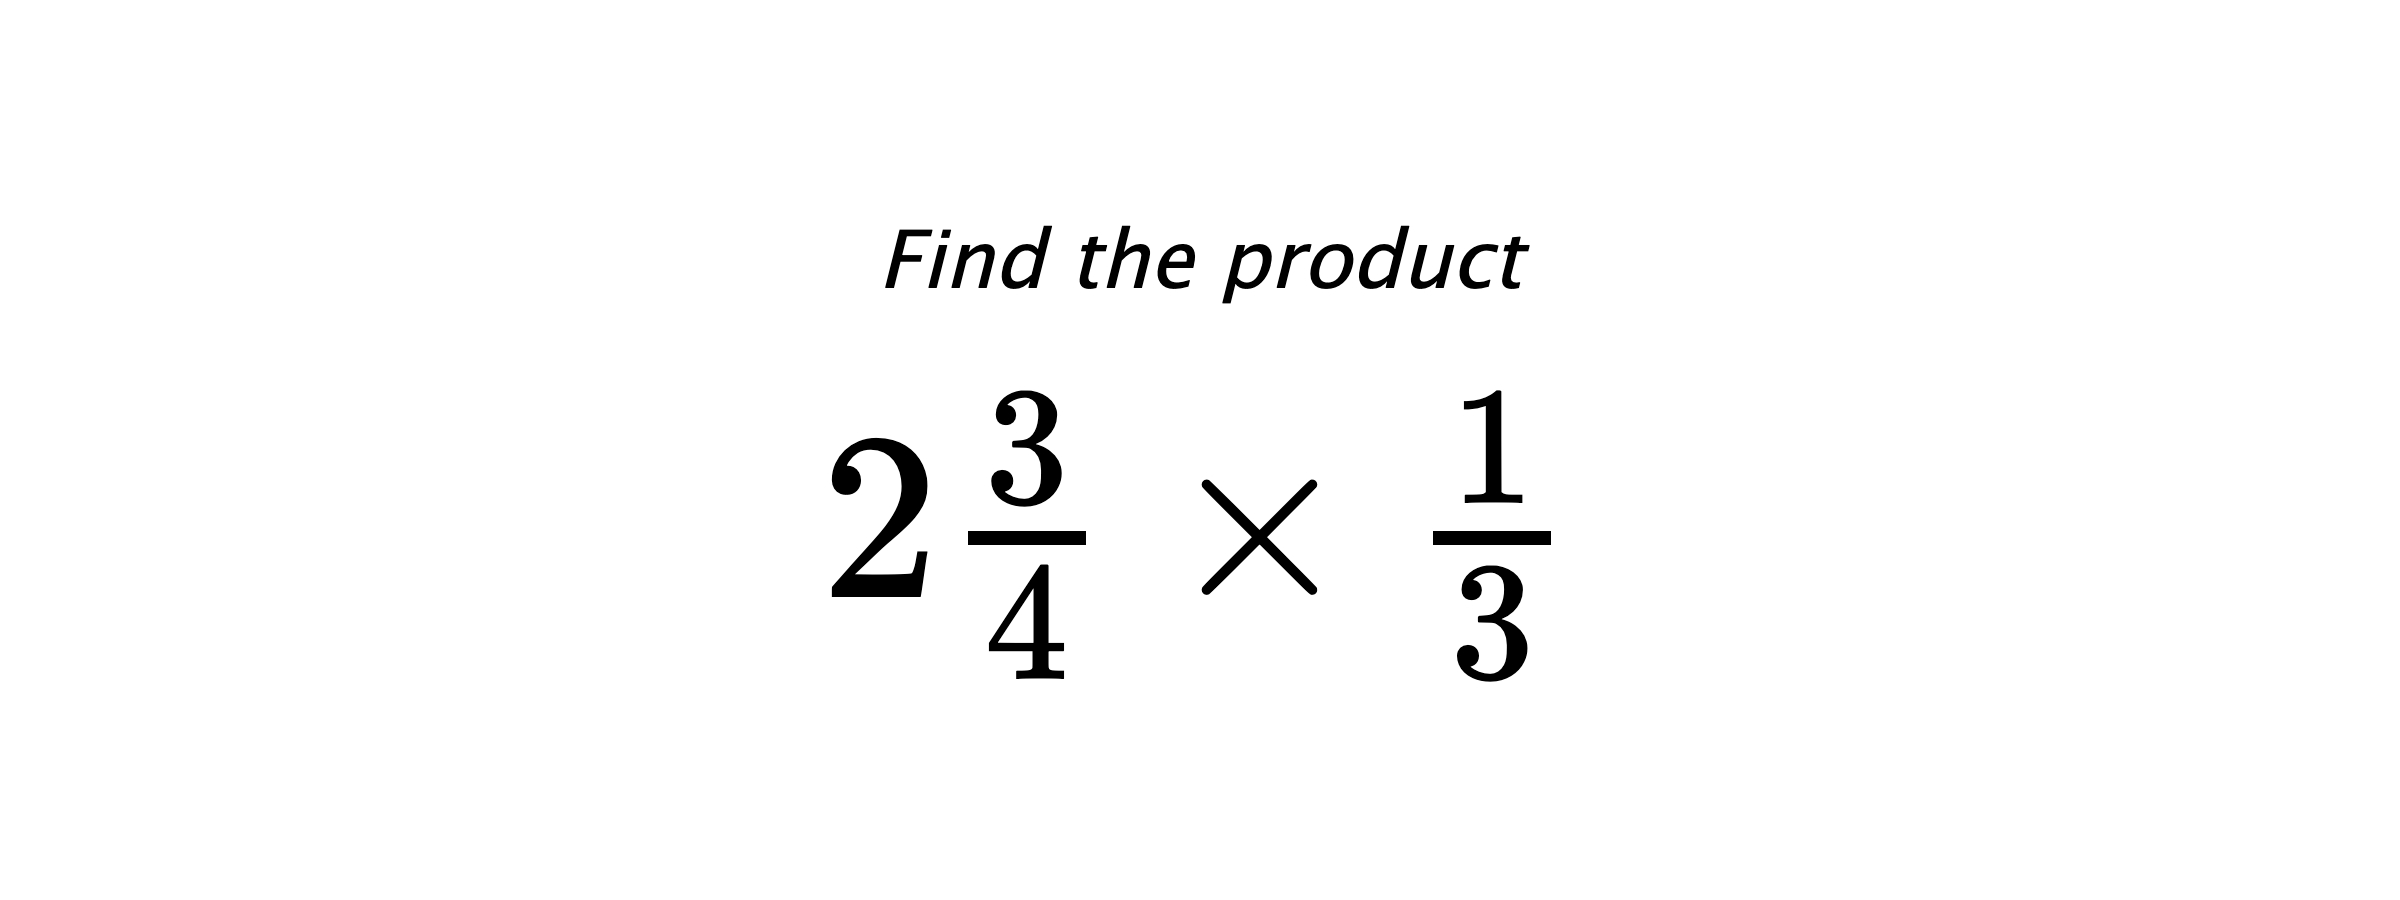 Find the product $ 2\frac{3}{4} \times \frac{1}{3} $